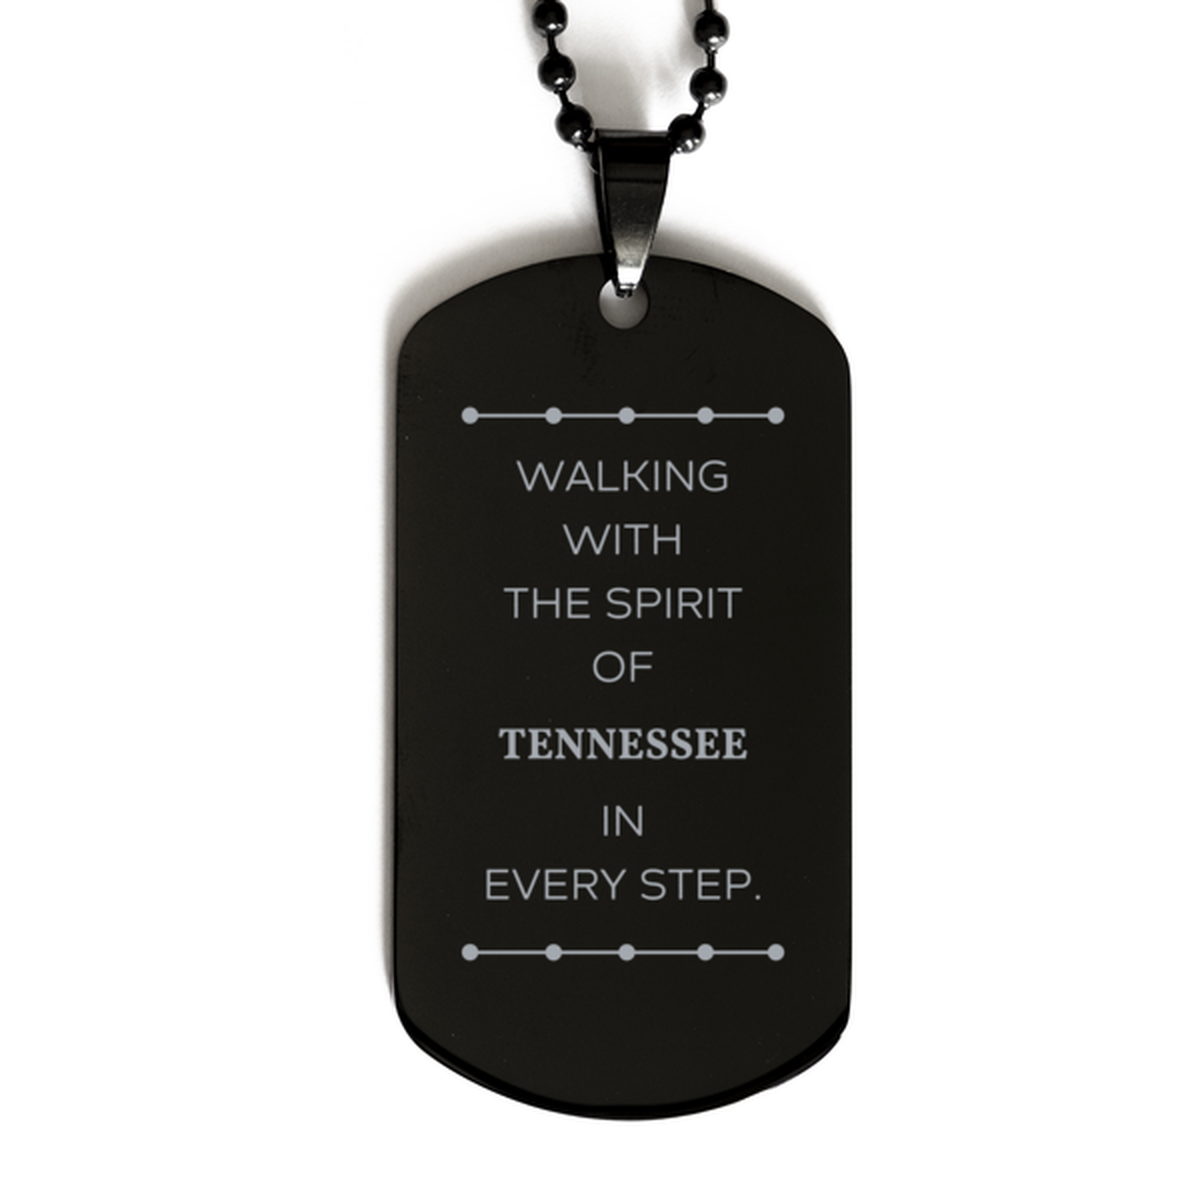 Tennessee Gifts, Walking with the spirit, Love Tennessee Birthday Christmas Black Dog Tag For Tennessee People, Men, Women, Friends